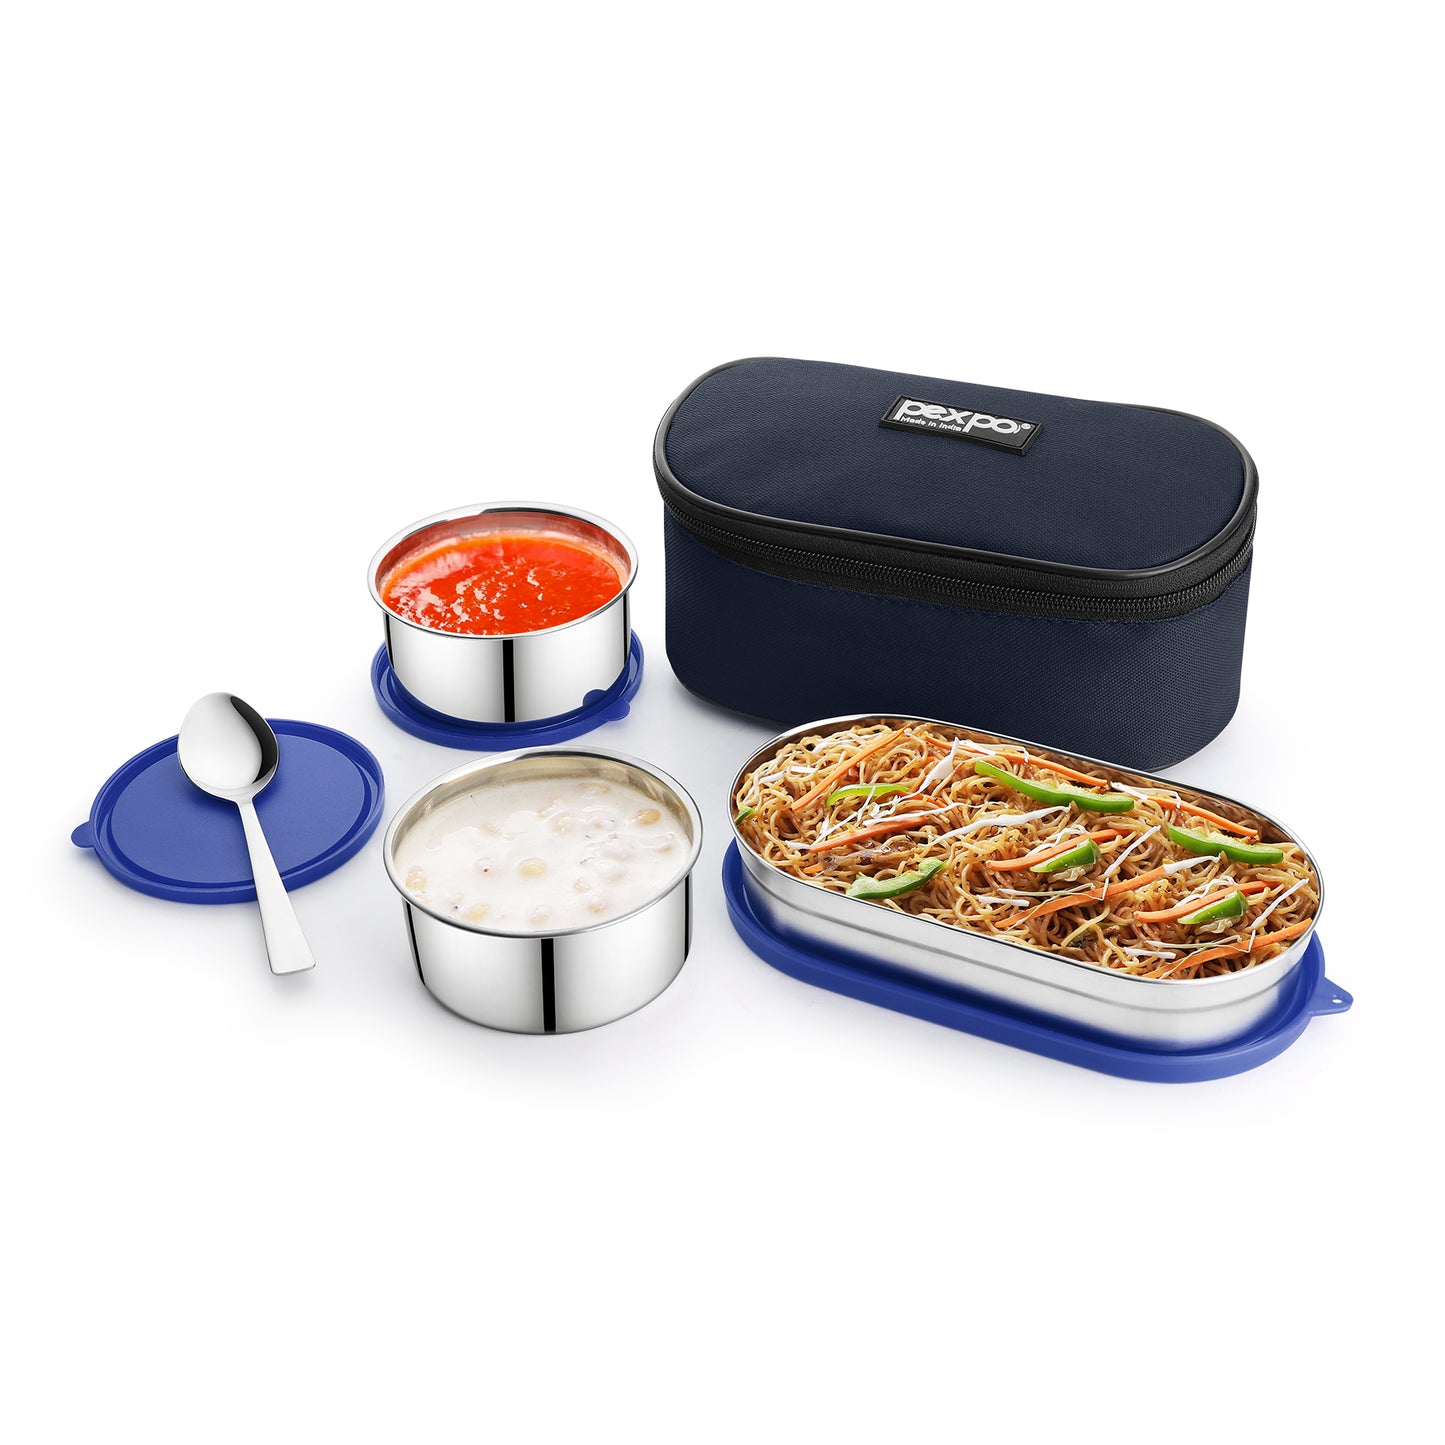 Pexpo DELIGHT STEEL  - Stainless Steel  Office Lunch Box